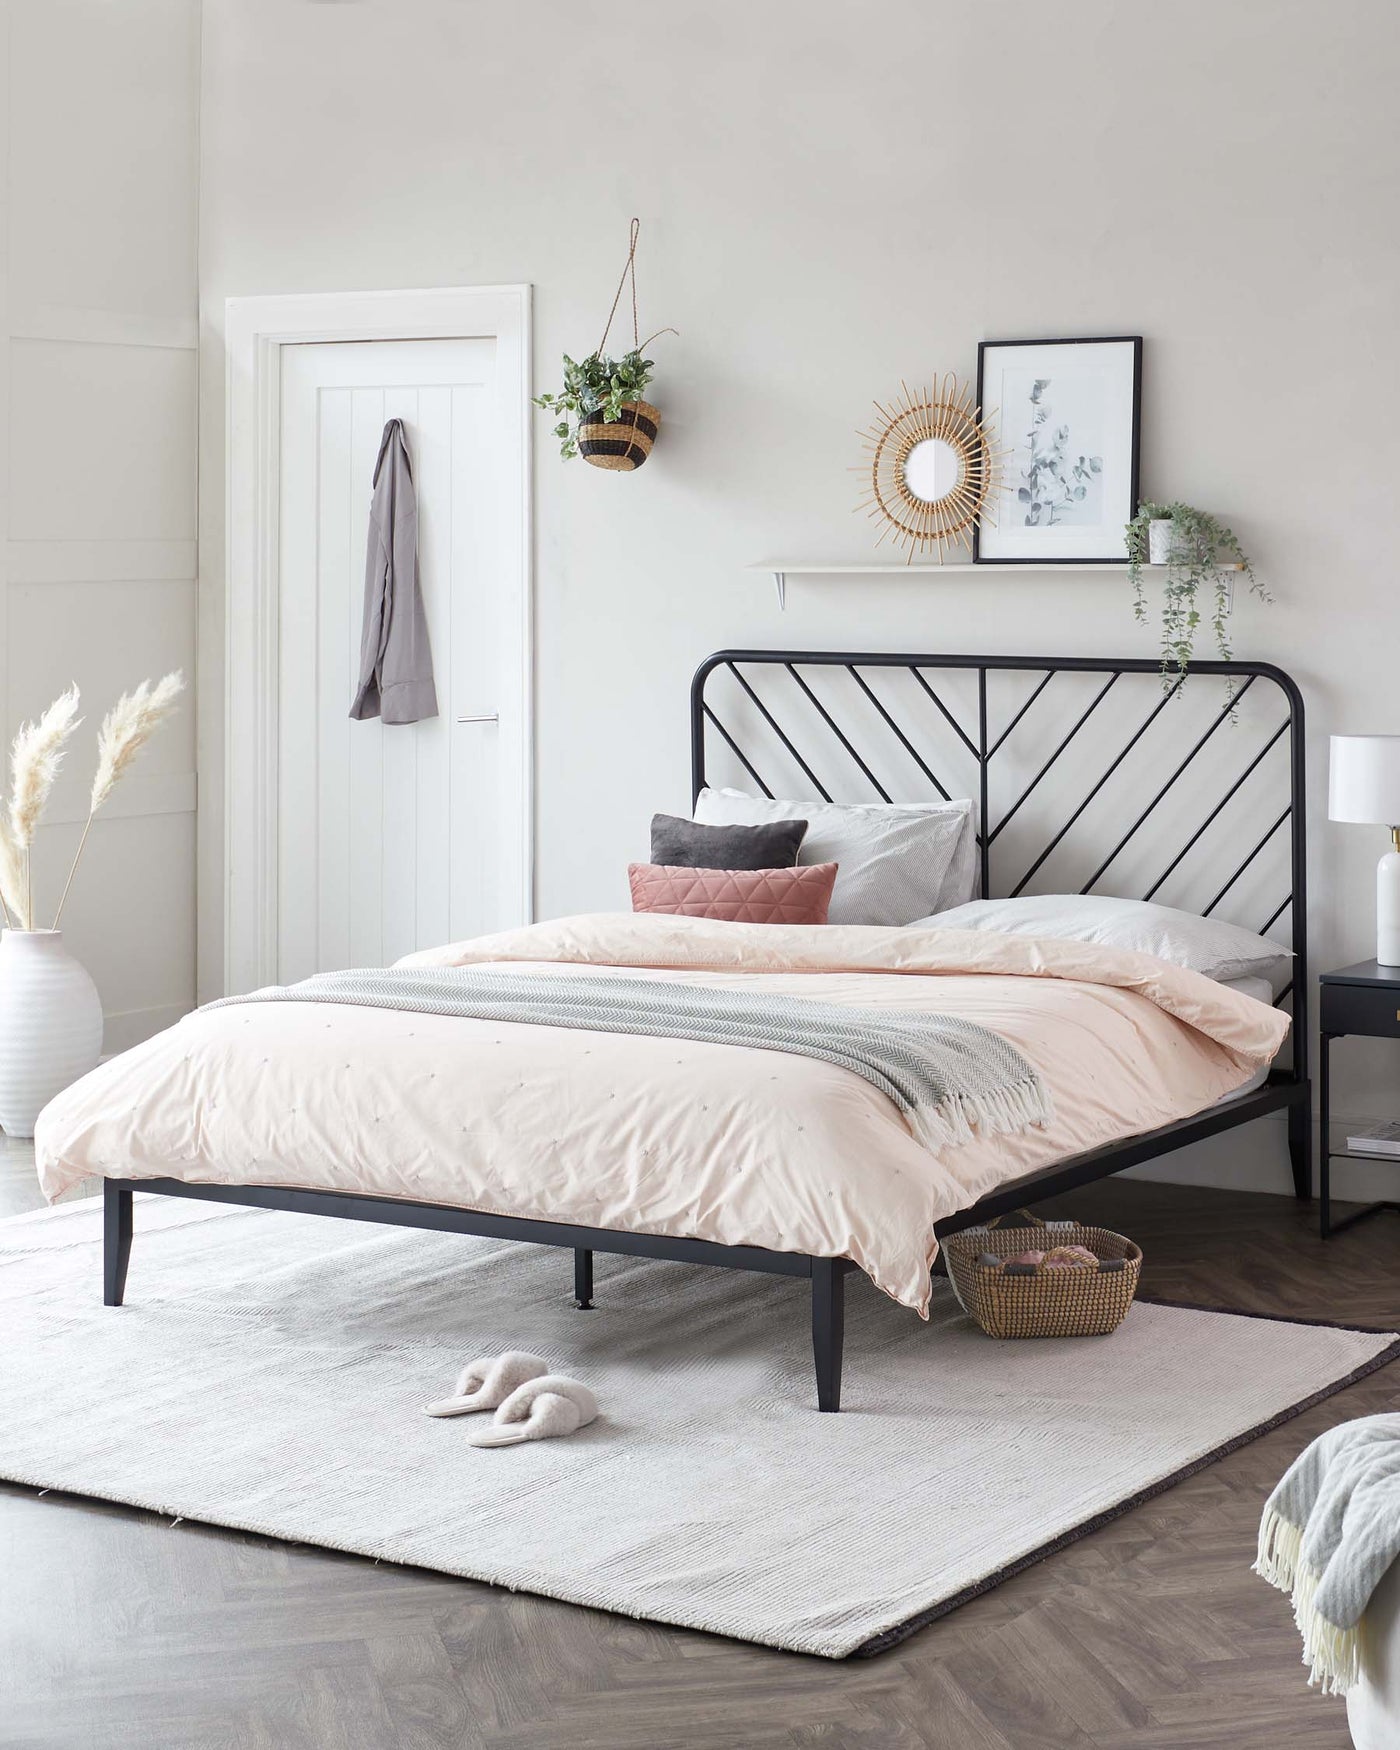 Contemporary minimalist style metal platform bed frame with a black finish featuring a headboard with a geometric pattern of intersecting lines. The bed is accessorized with a blush and grey bedding set consisting of a duvet cover, sheets, and assorted throw pillows. A light grey area rug is placed under the bed.